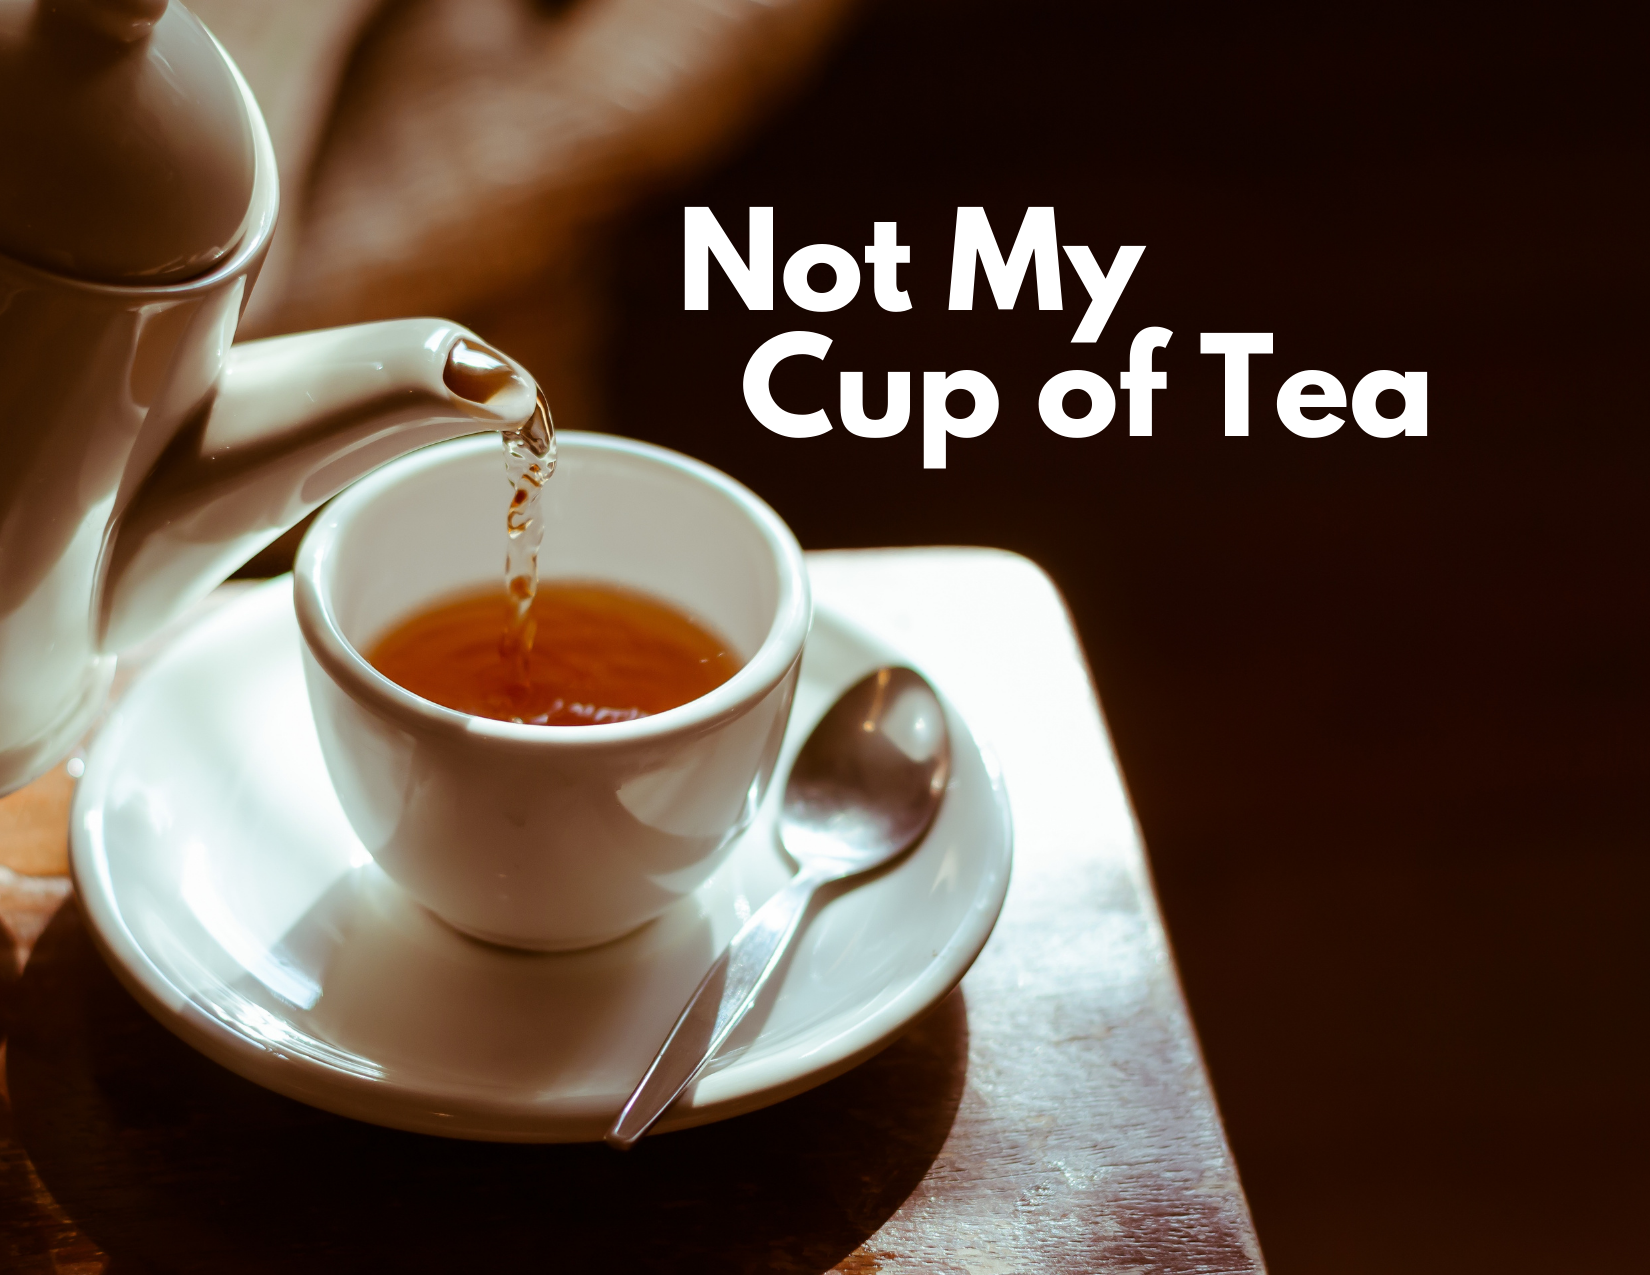 A picture of tea being poured into a cup with the caption - Not My Cup Of Tea